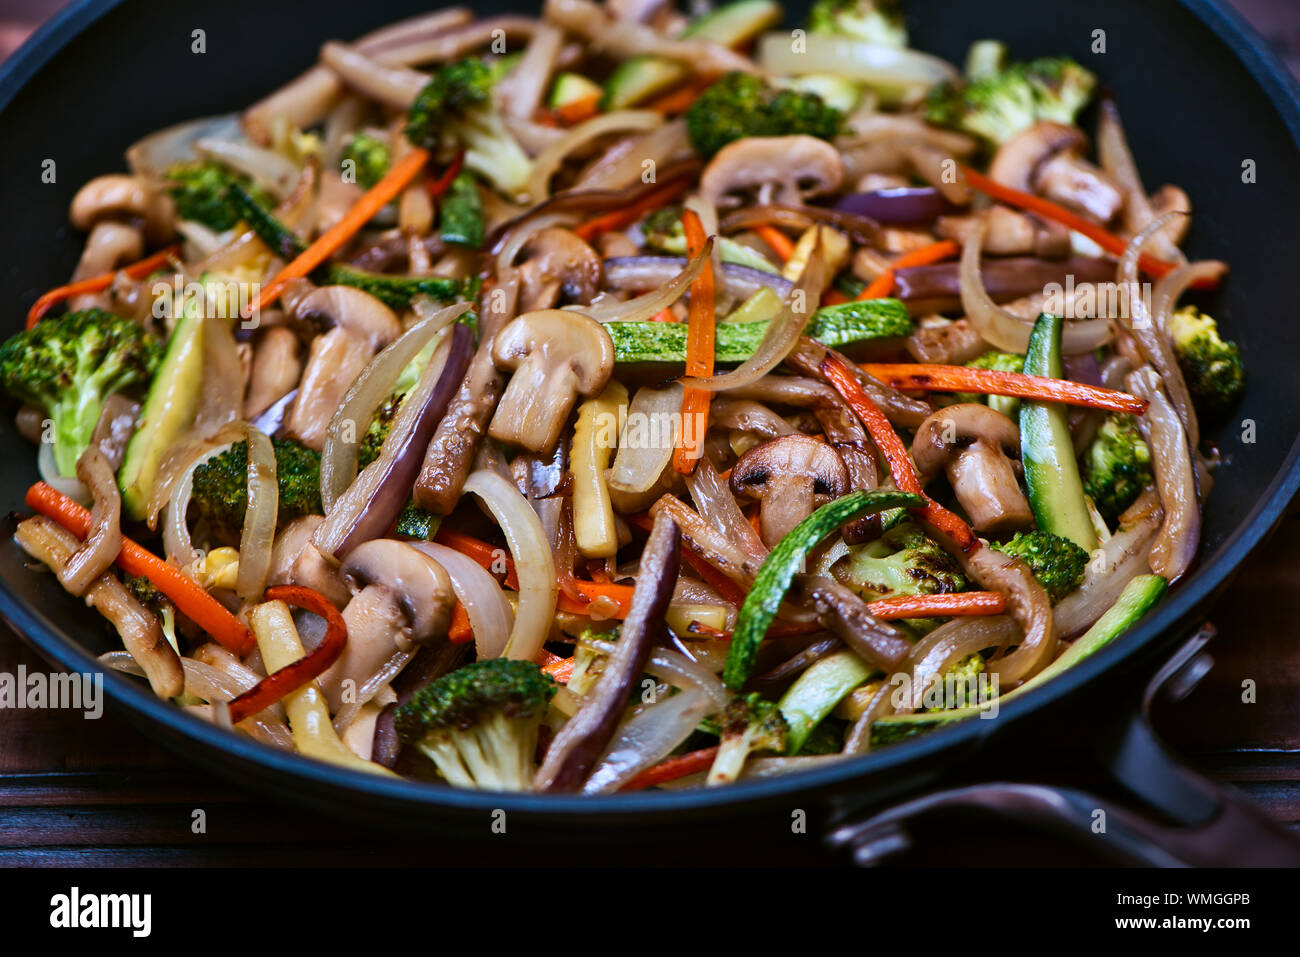 Sauted Chopped Vegetables in Juliana: Zucchini, Onions, Eggplant, Carrots, Mushrooms and Broccoli inside an skillet over a vintage wooden surface Stock Photo